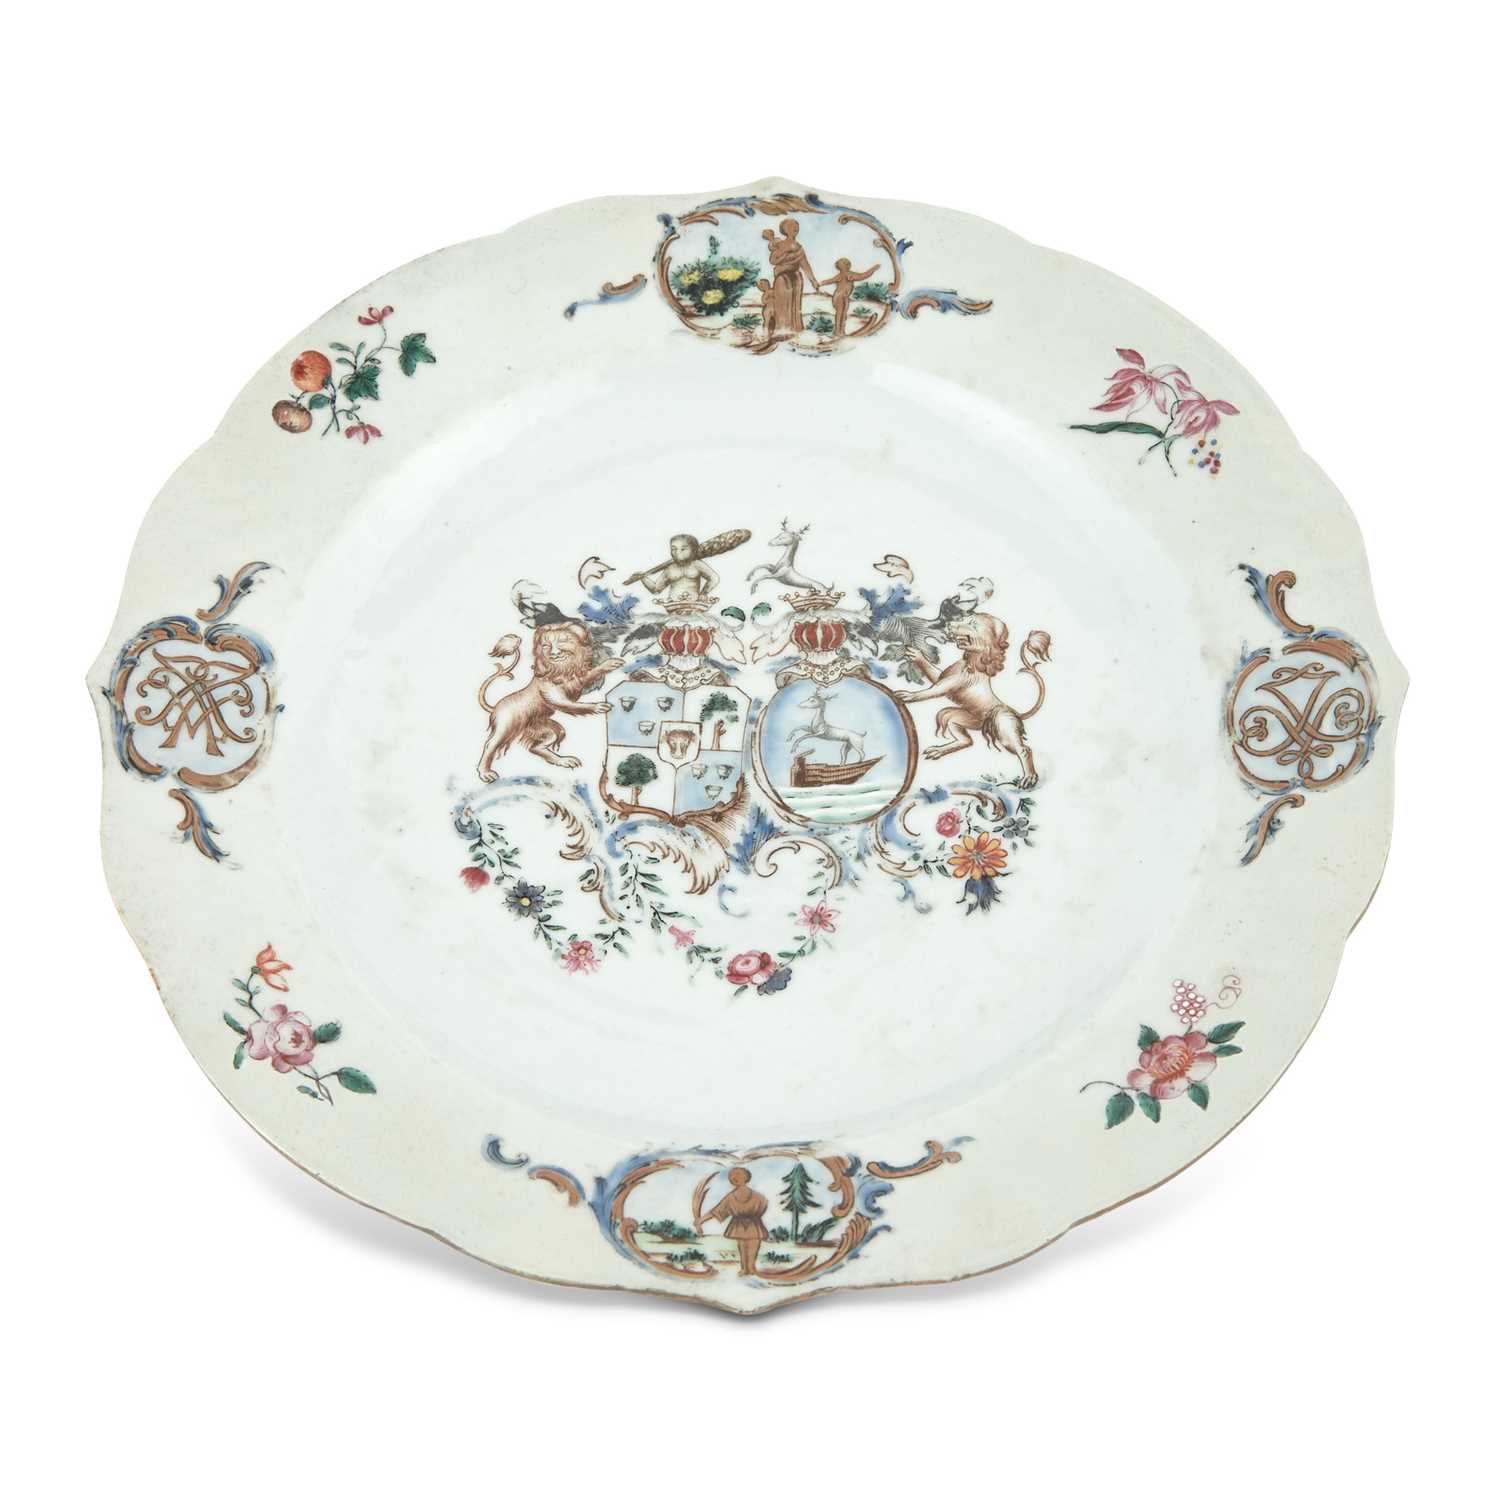 Lot 375 - A Chinese Export Porcelain Dutch Market Armorial Plate